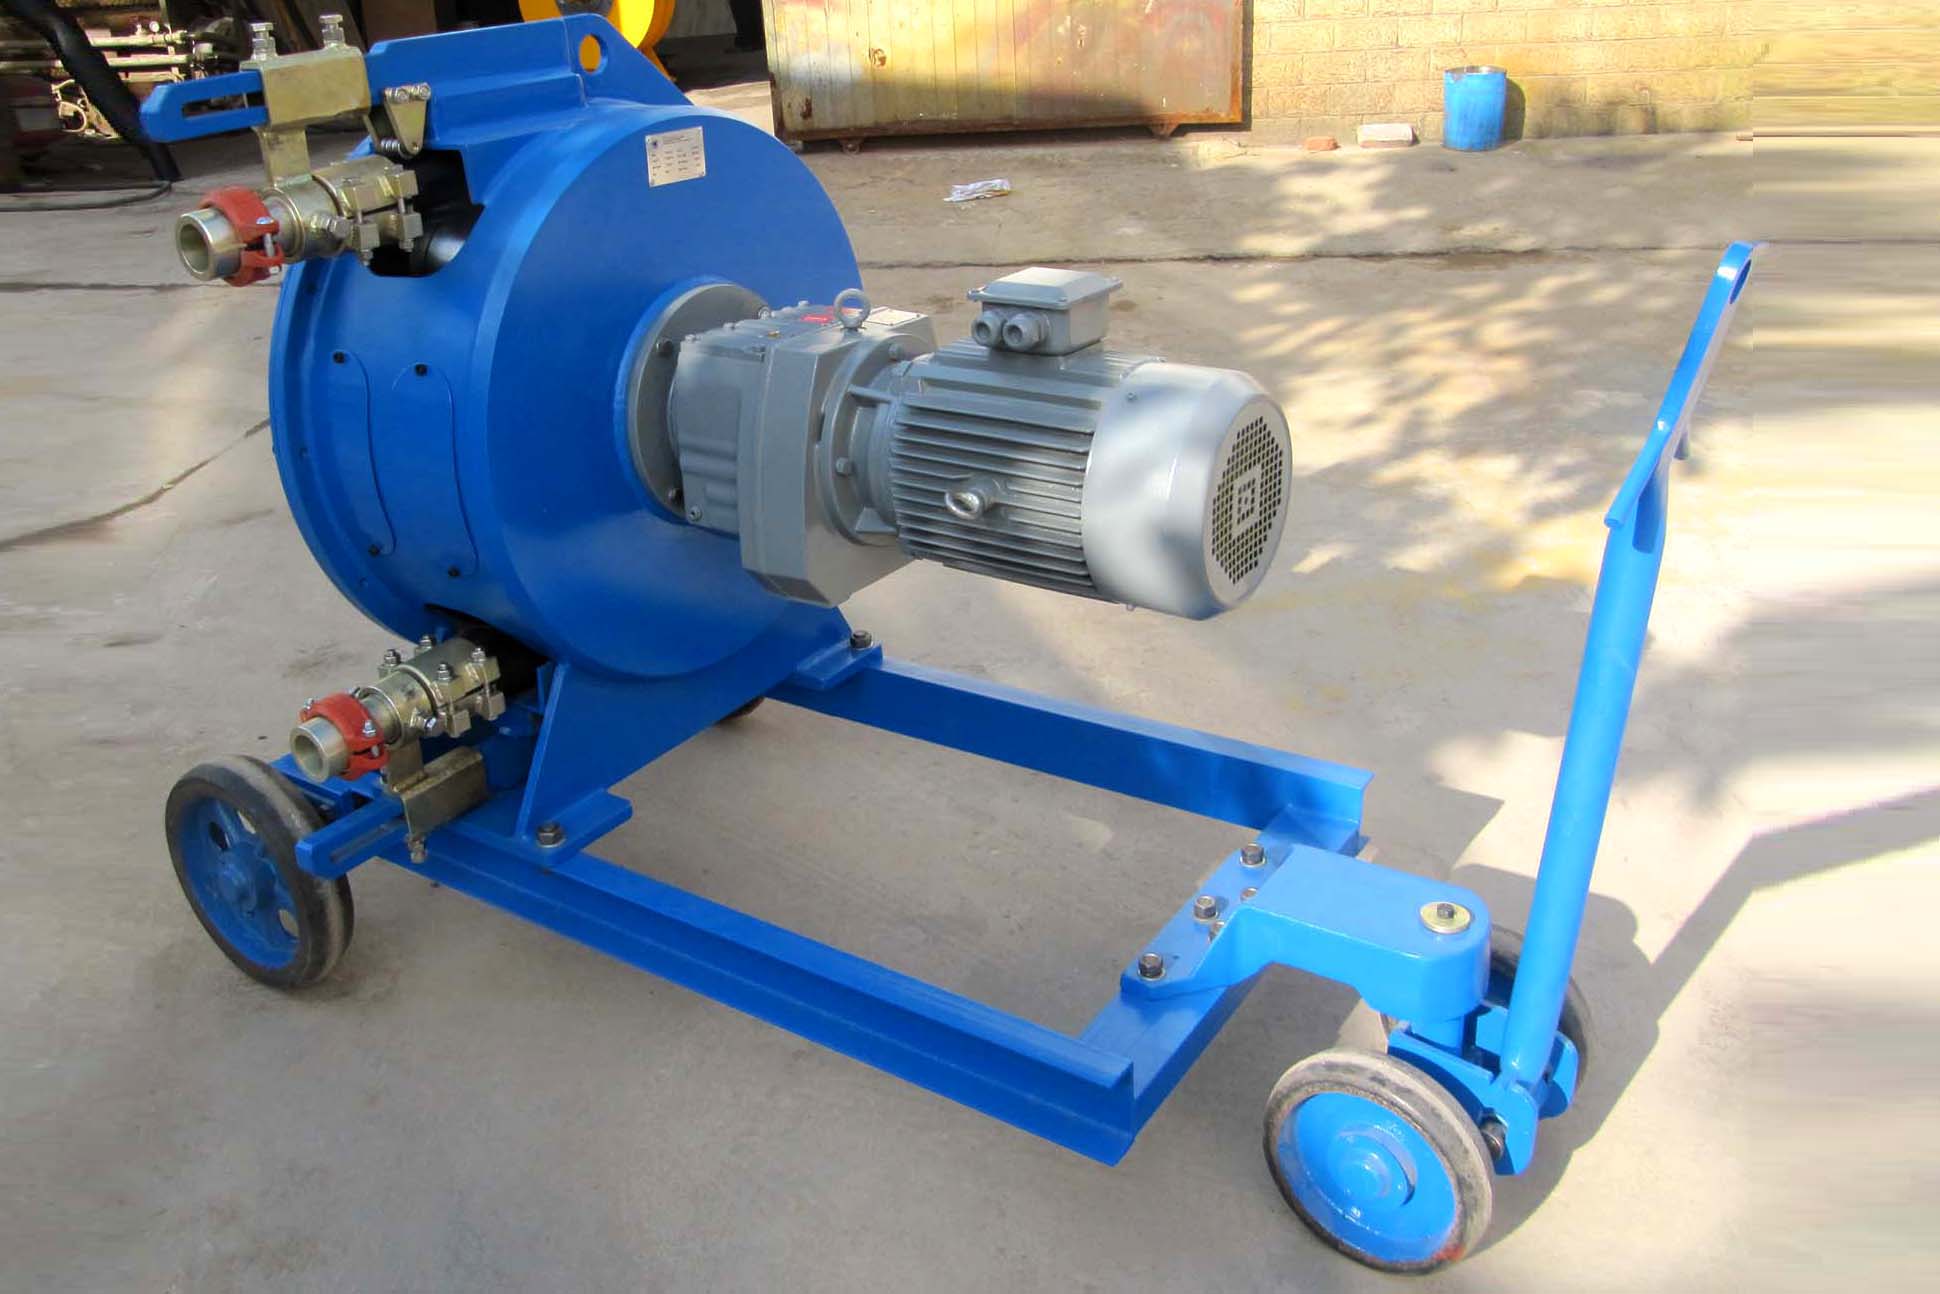 Our foam concrete pumps come with different capacities for a wide range of applications